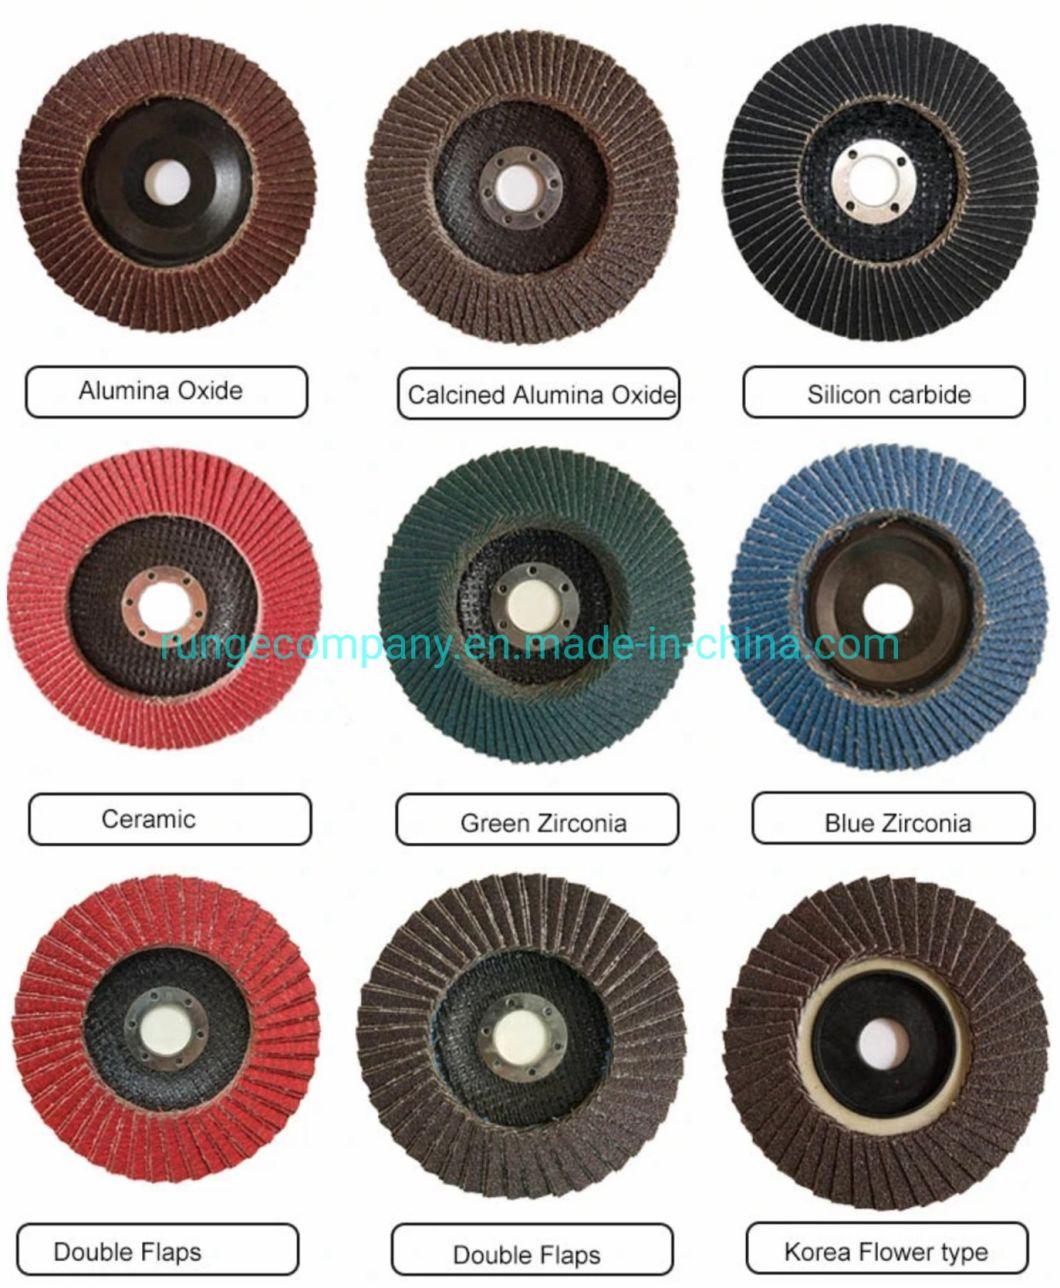 Power Electric Tools Accessories 4" X. 040 X 5/8" Arbor Metal & Stainless Steel Cut off Wheels Ultra Thin Discs for Asia